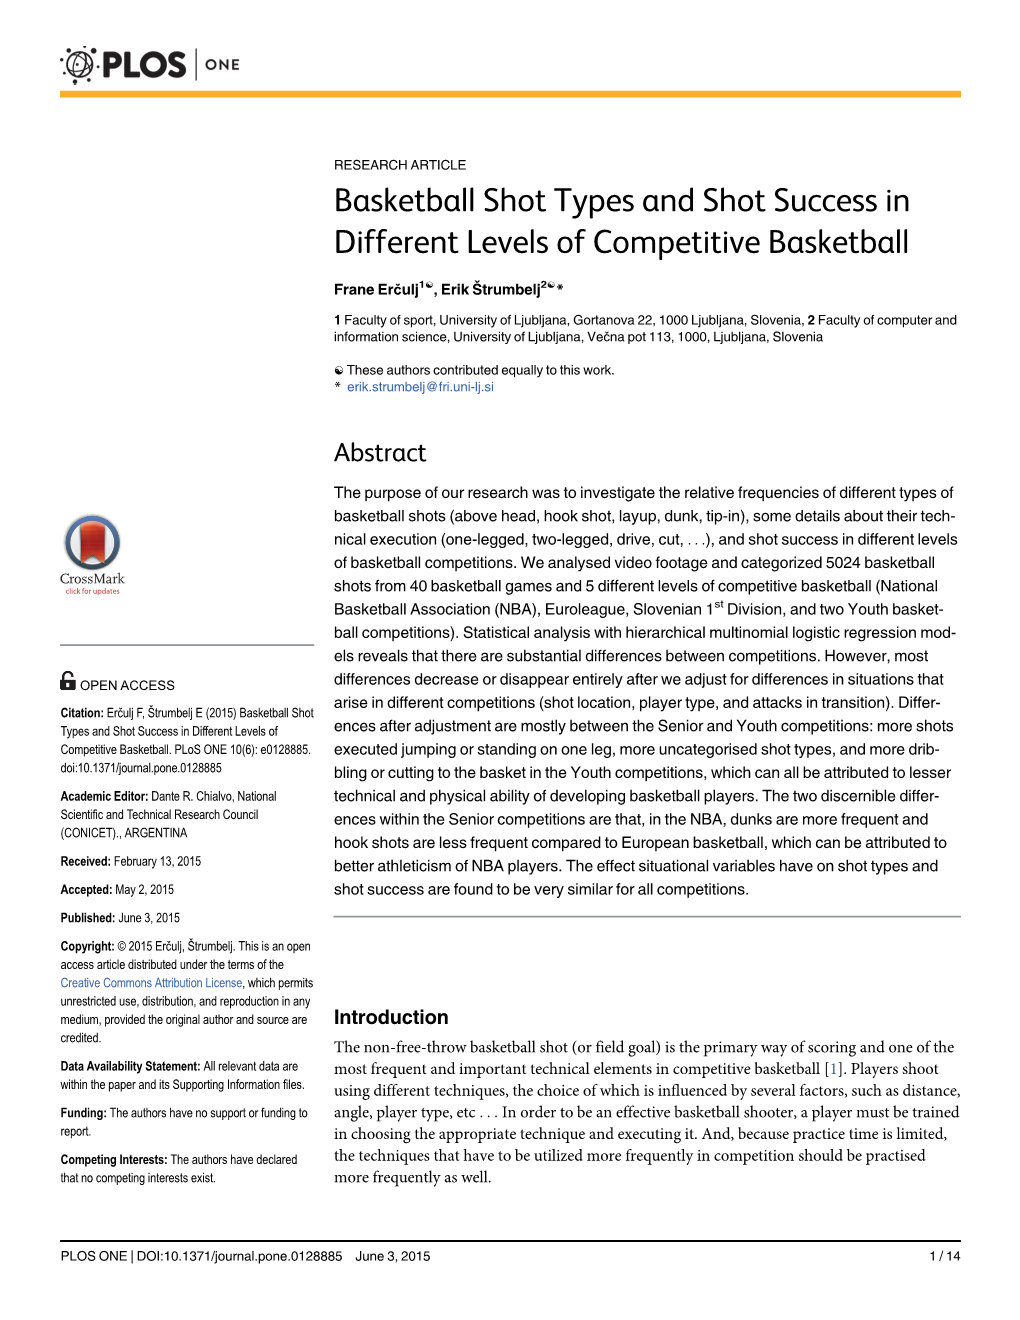 Basketball Shot Types and Shot Success in Different Levels of Competitive Basketball